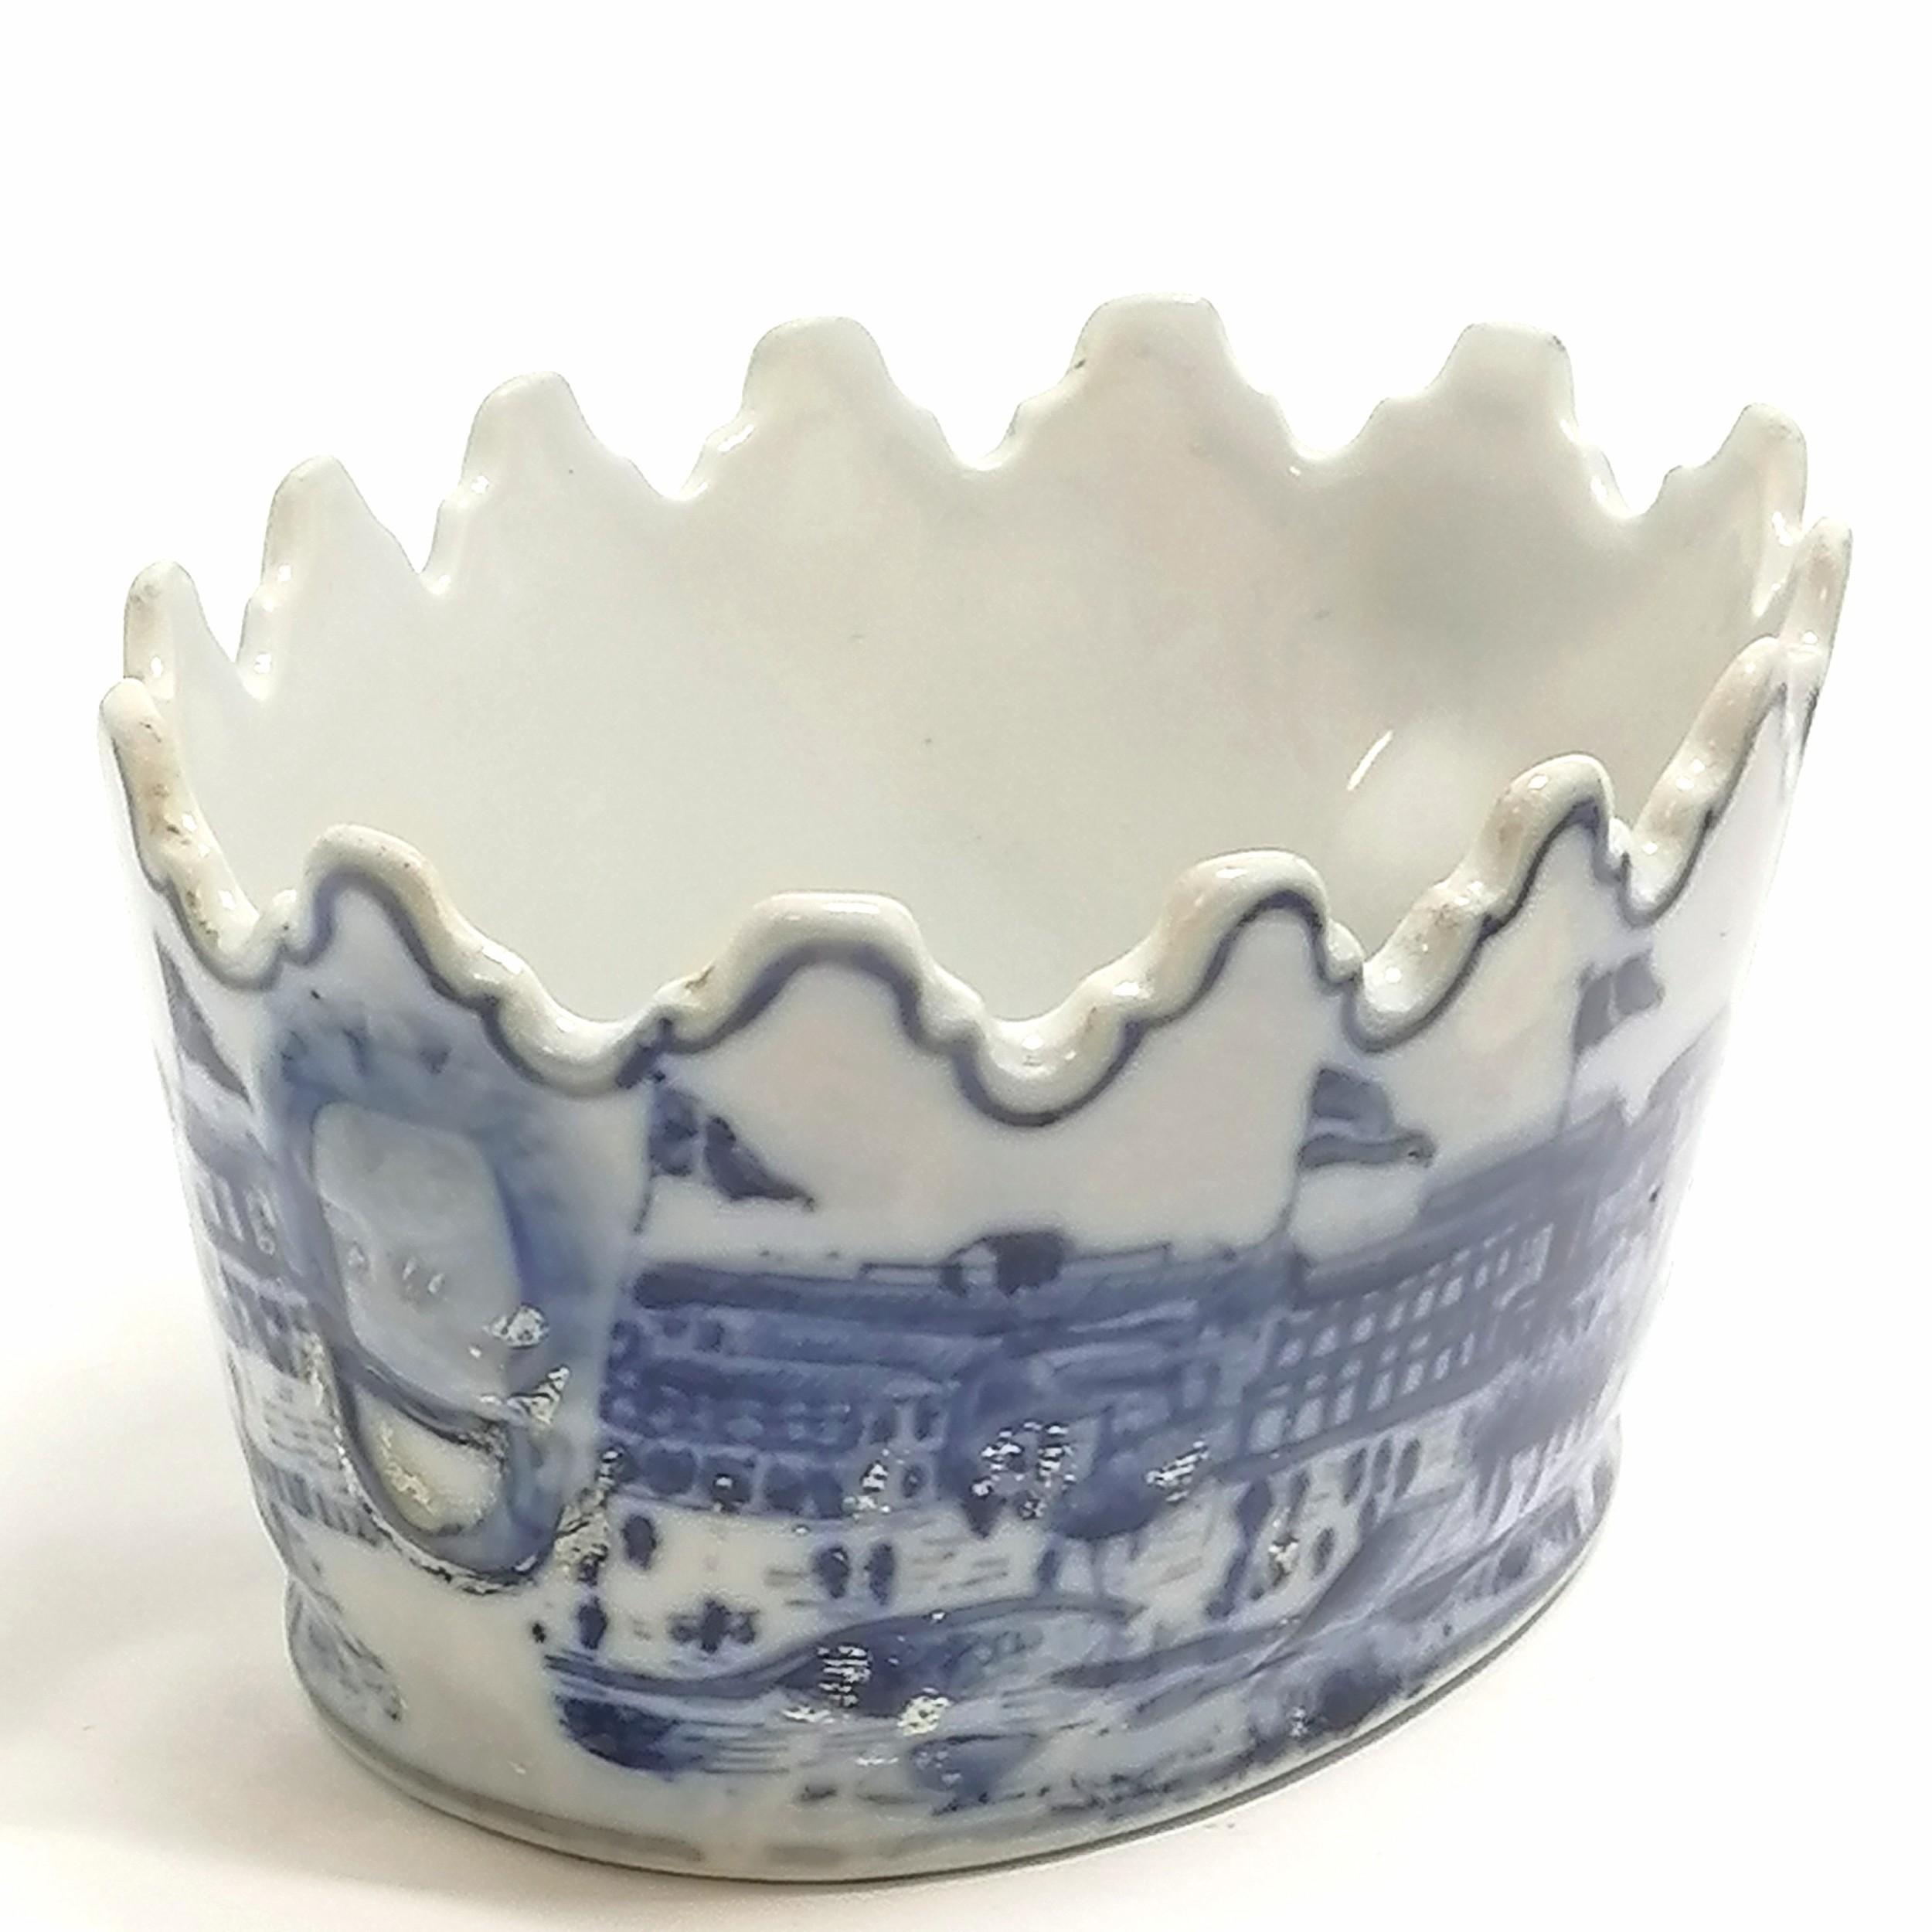 Blue & white transfer decorated cache pot with exhibition detail with lion mask detail handles - - Image 4 of 4